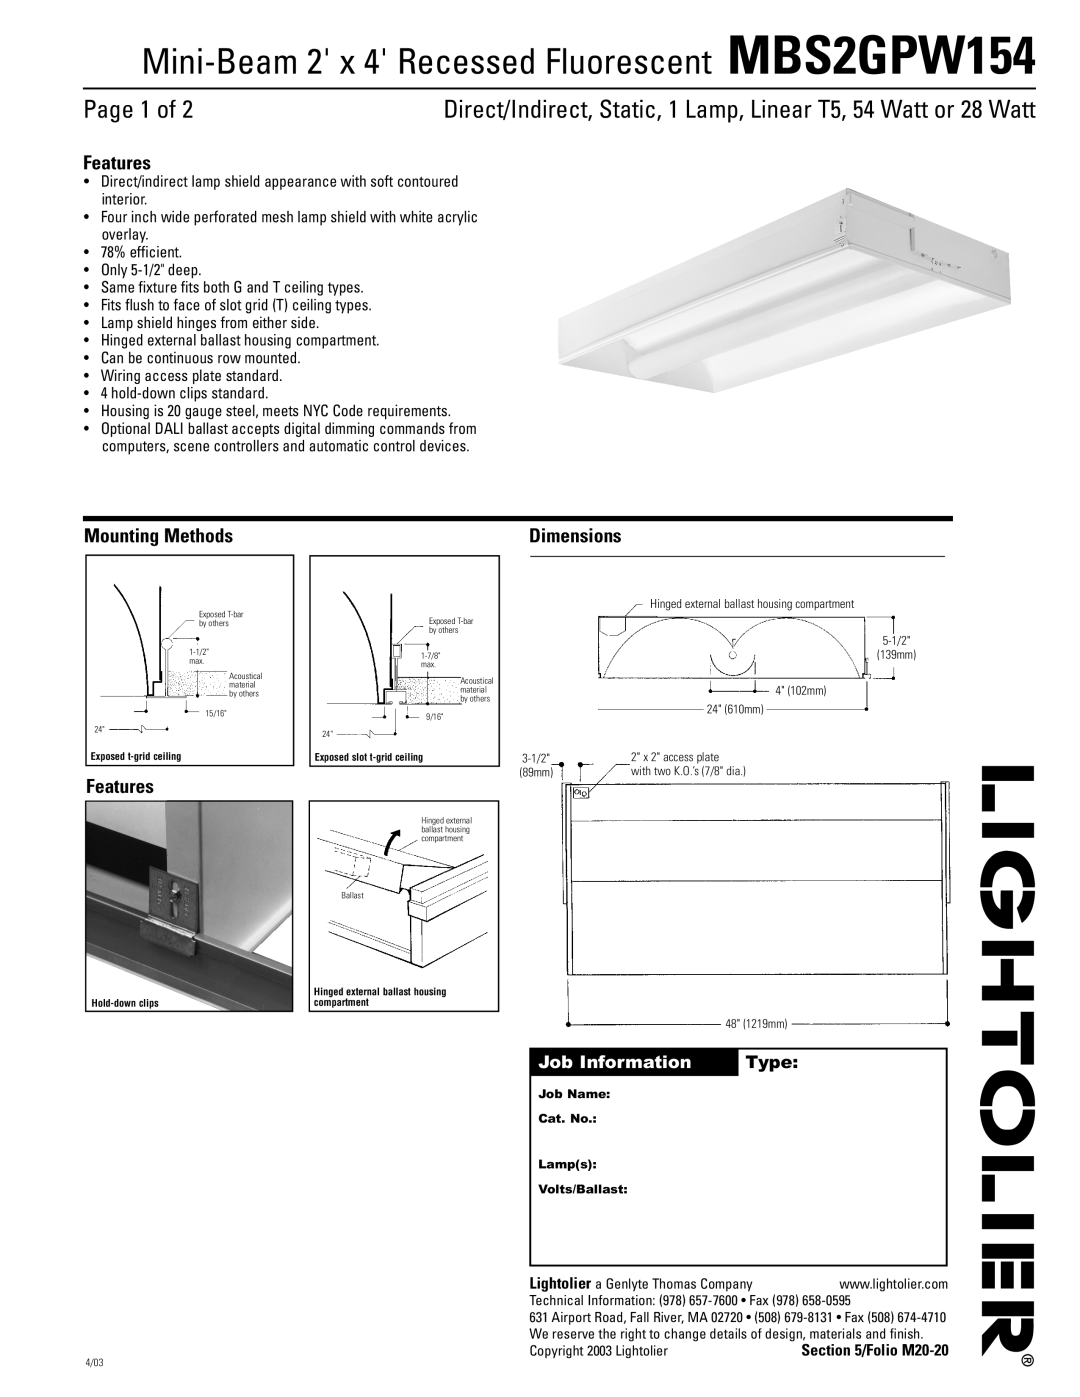 Lightolier MBS2GPW154 dimensions Page 1 of, Features, Mounting Methods, Dimensions, Job Information Type 